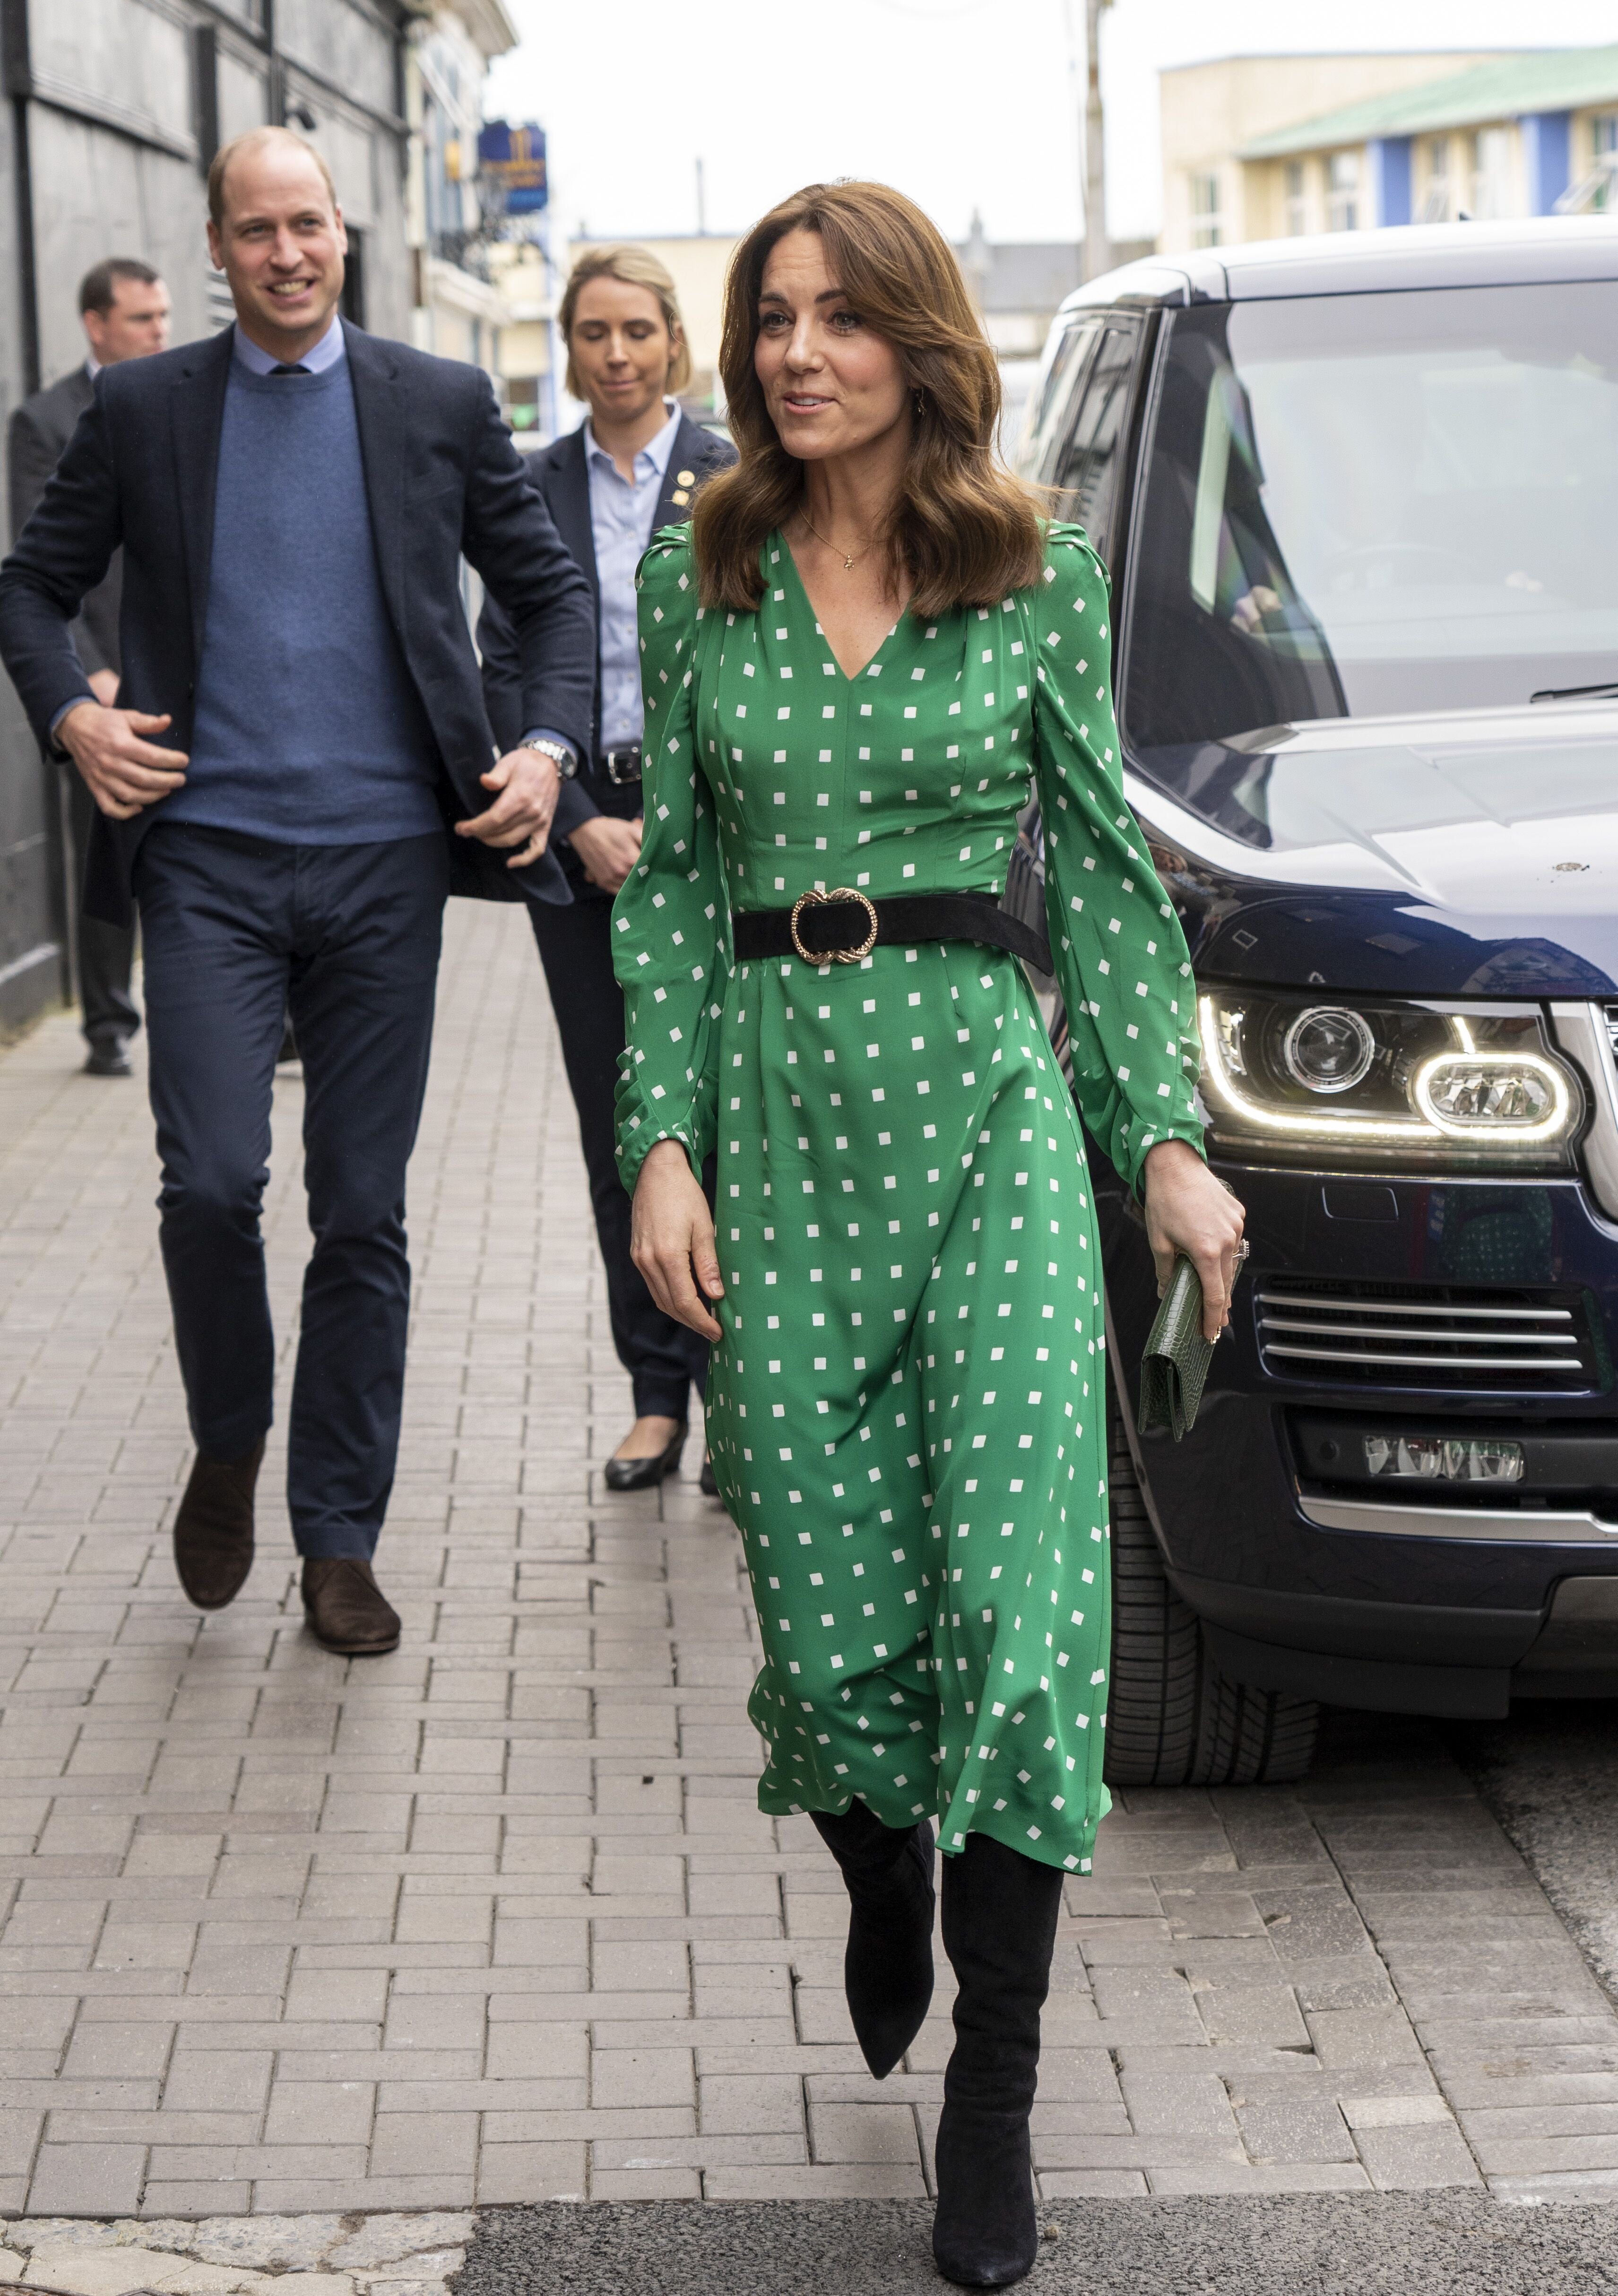 Prince William and Duchess Kate arrive to visit a family-owned, traditional Irish pub in Galway city center on March 5, 2020, in Ireland | Photo: Getty Images